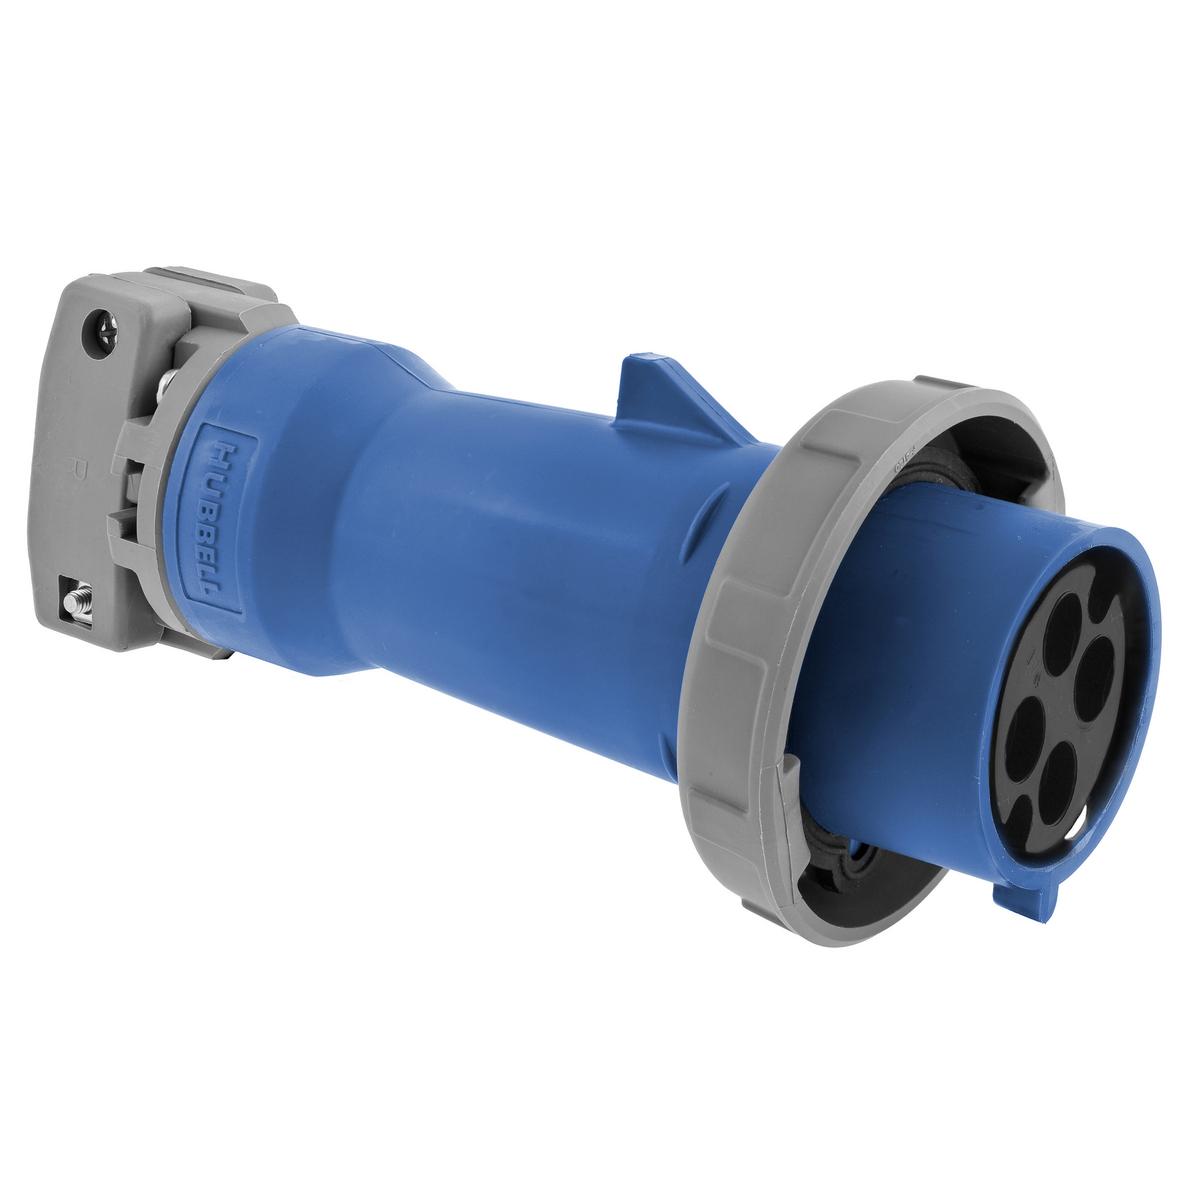 Hubbell HBL4100P9WR Heavy Duty Products, IEC Pin and Sleeve Devices, Industrial Grade, Male, Plug, 100A 3-Phase Delta 250V AC, 3- Pole 4-Wire Grounding, Terminal Screws, Blue, Watertight- Reversed  ; Gasketed sealing ring provides watertight seal ; Heavy duty external cord g